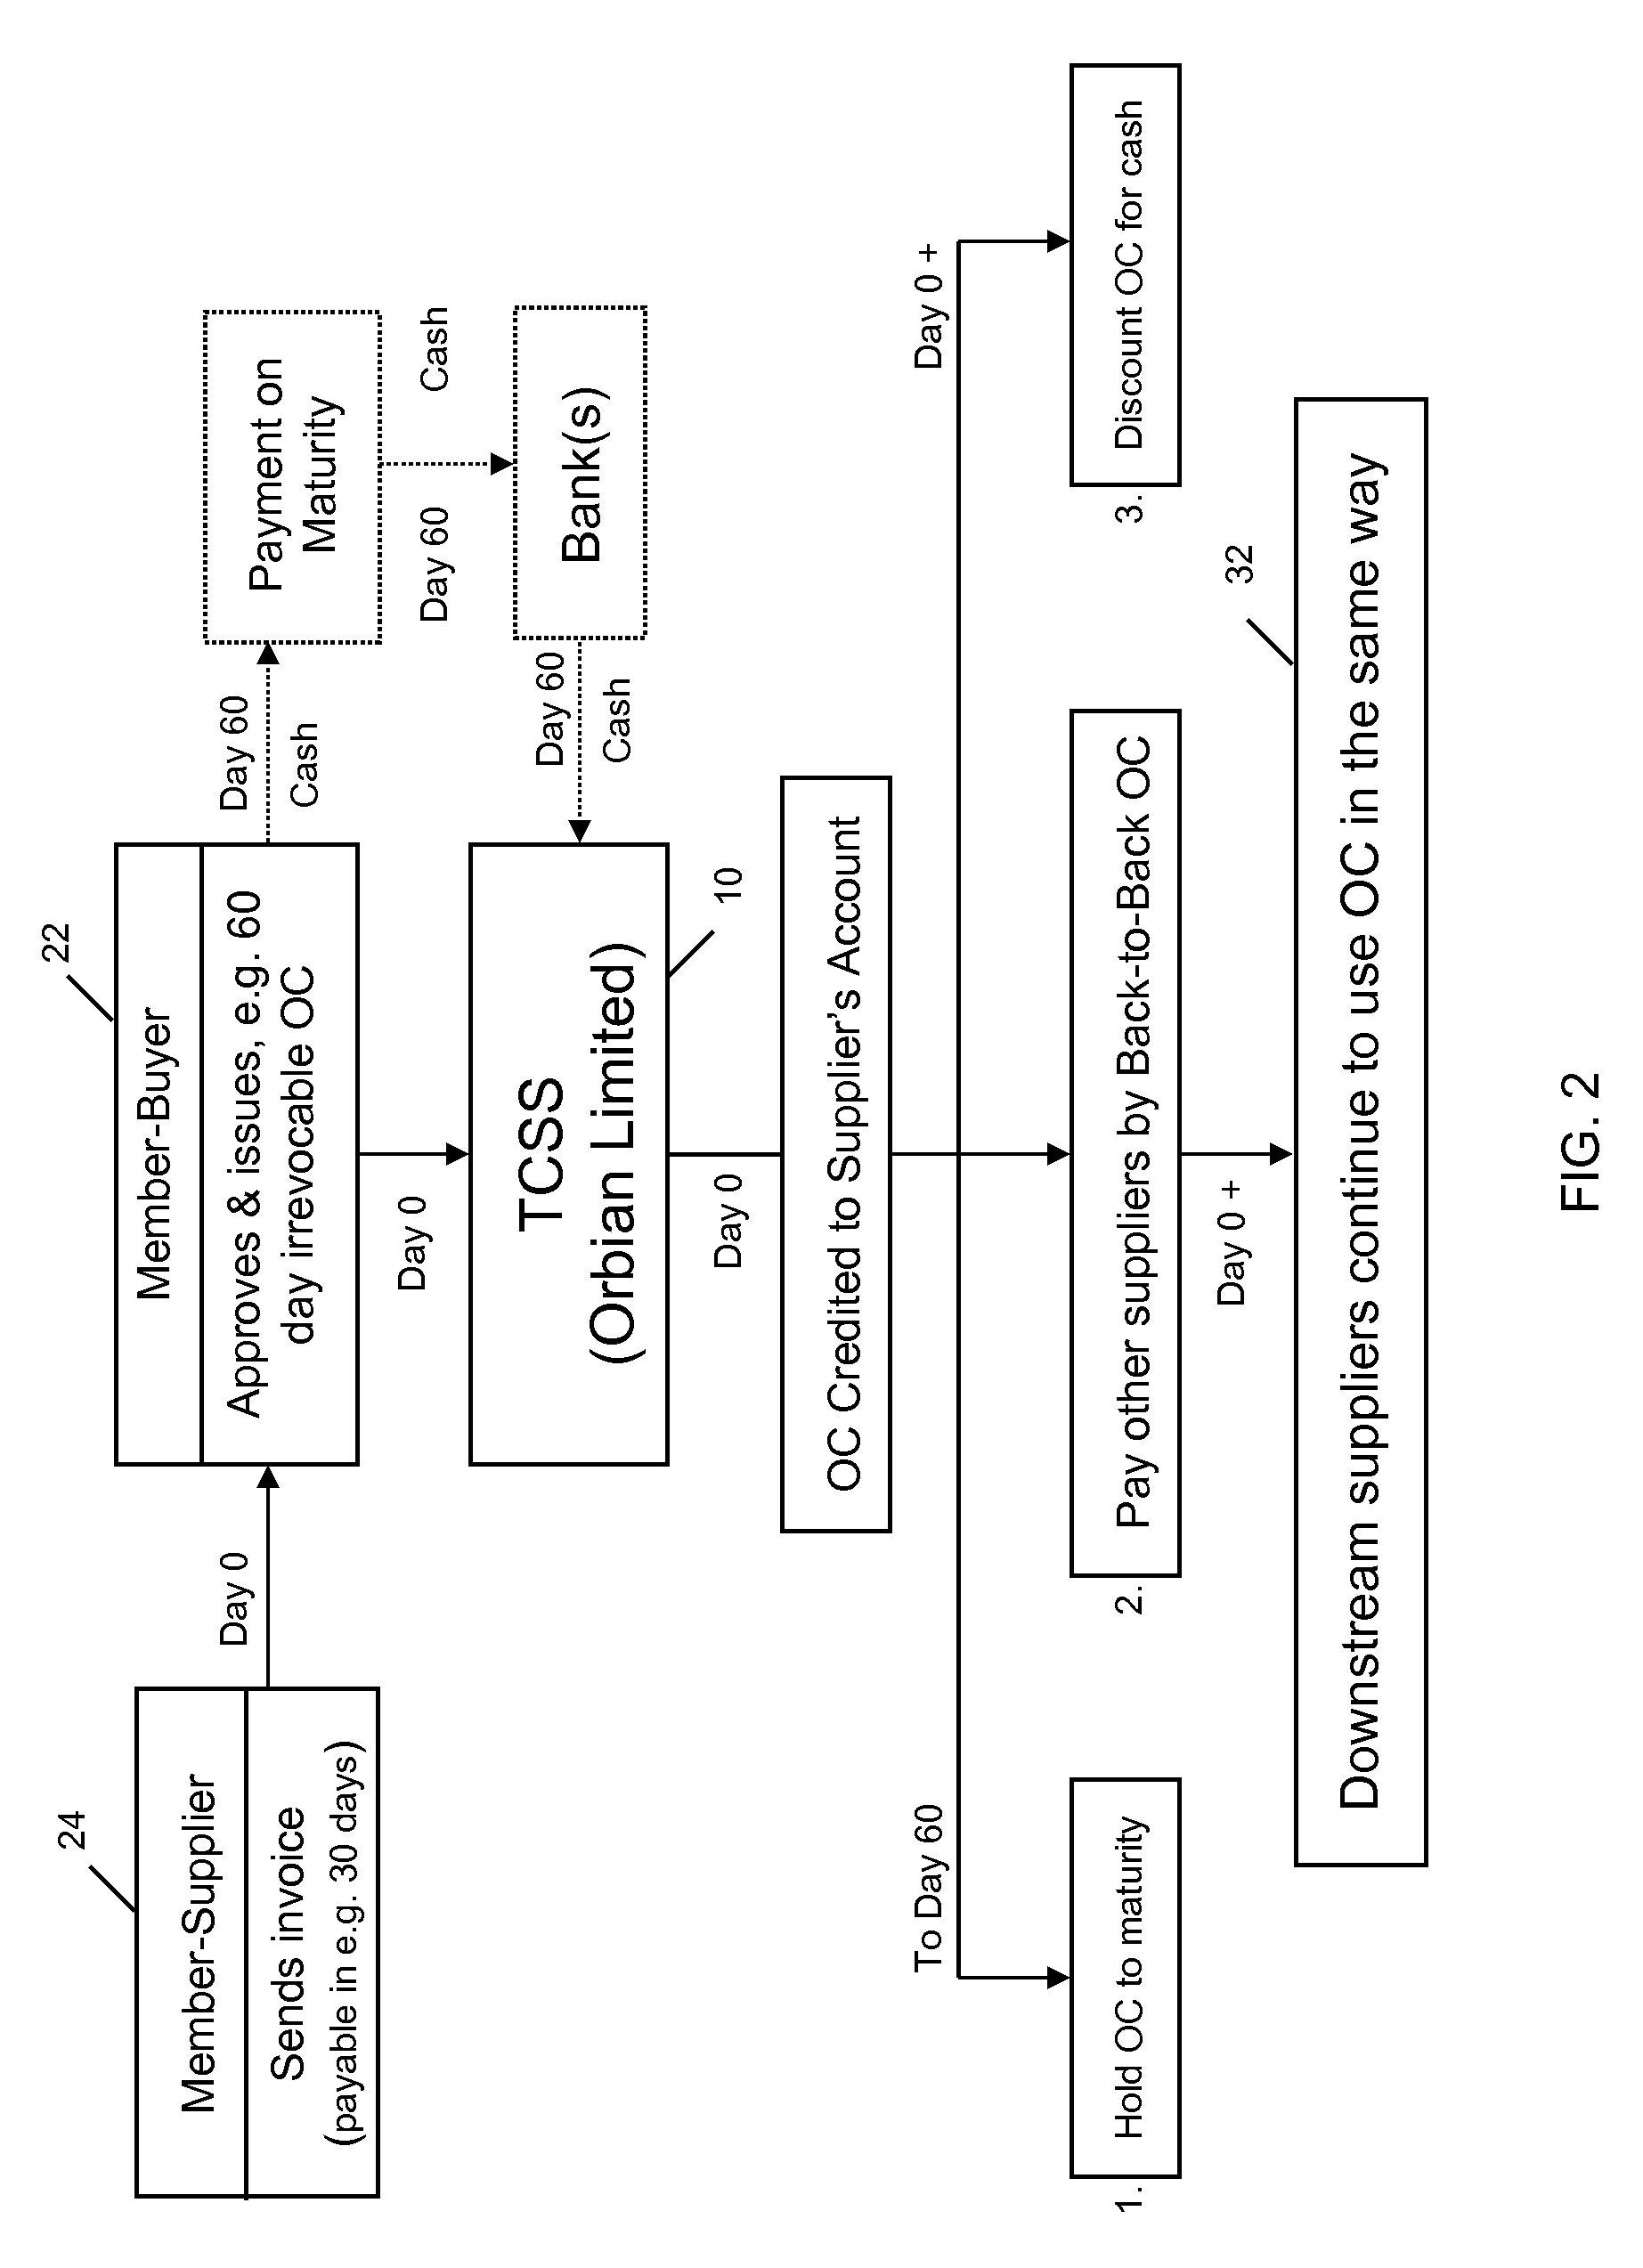 System and Method of Transaction Settlement Using Trade Credit